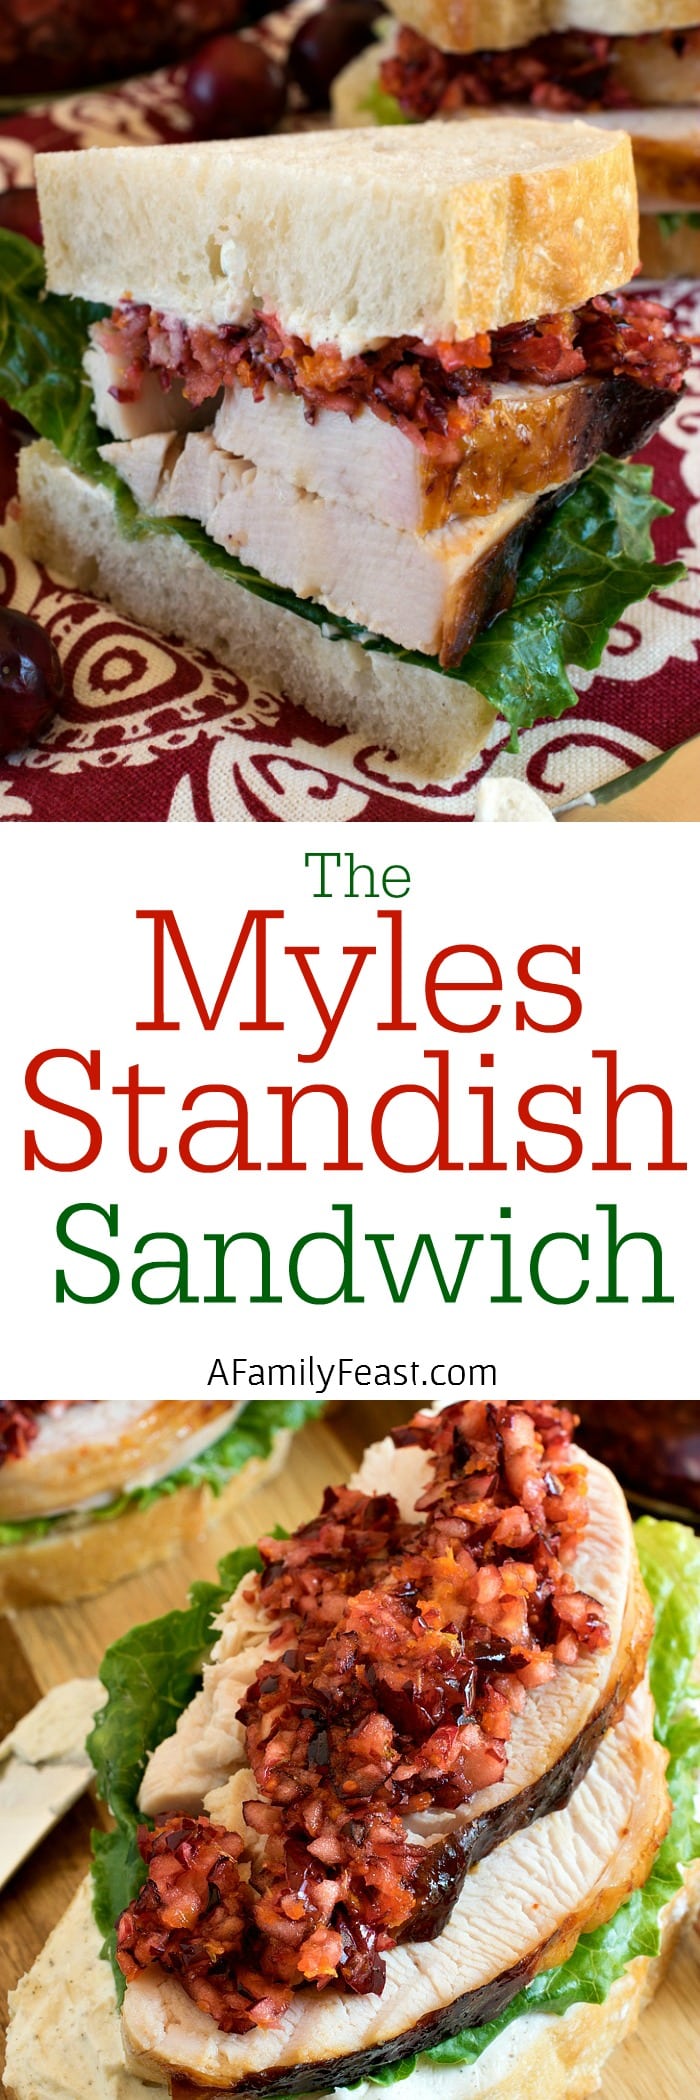 Myles Standish Sandwich - A delicious sandwich made with turkey slices, cream cheese on white crusty bread, and a delicious cranberry orange relish on top. So good!